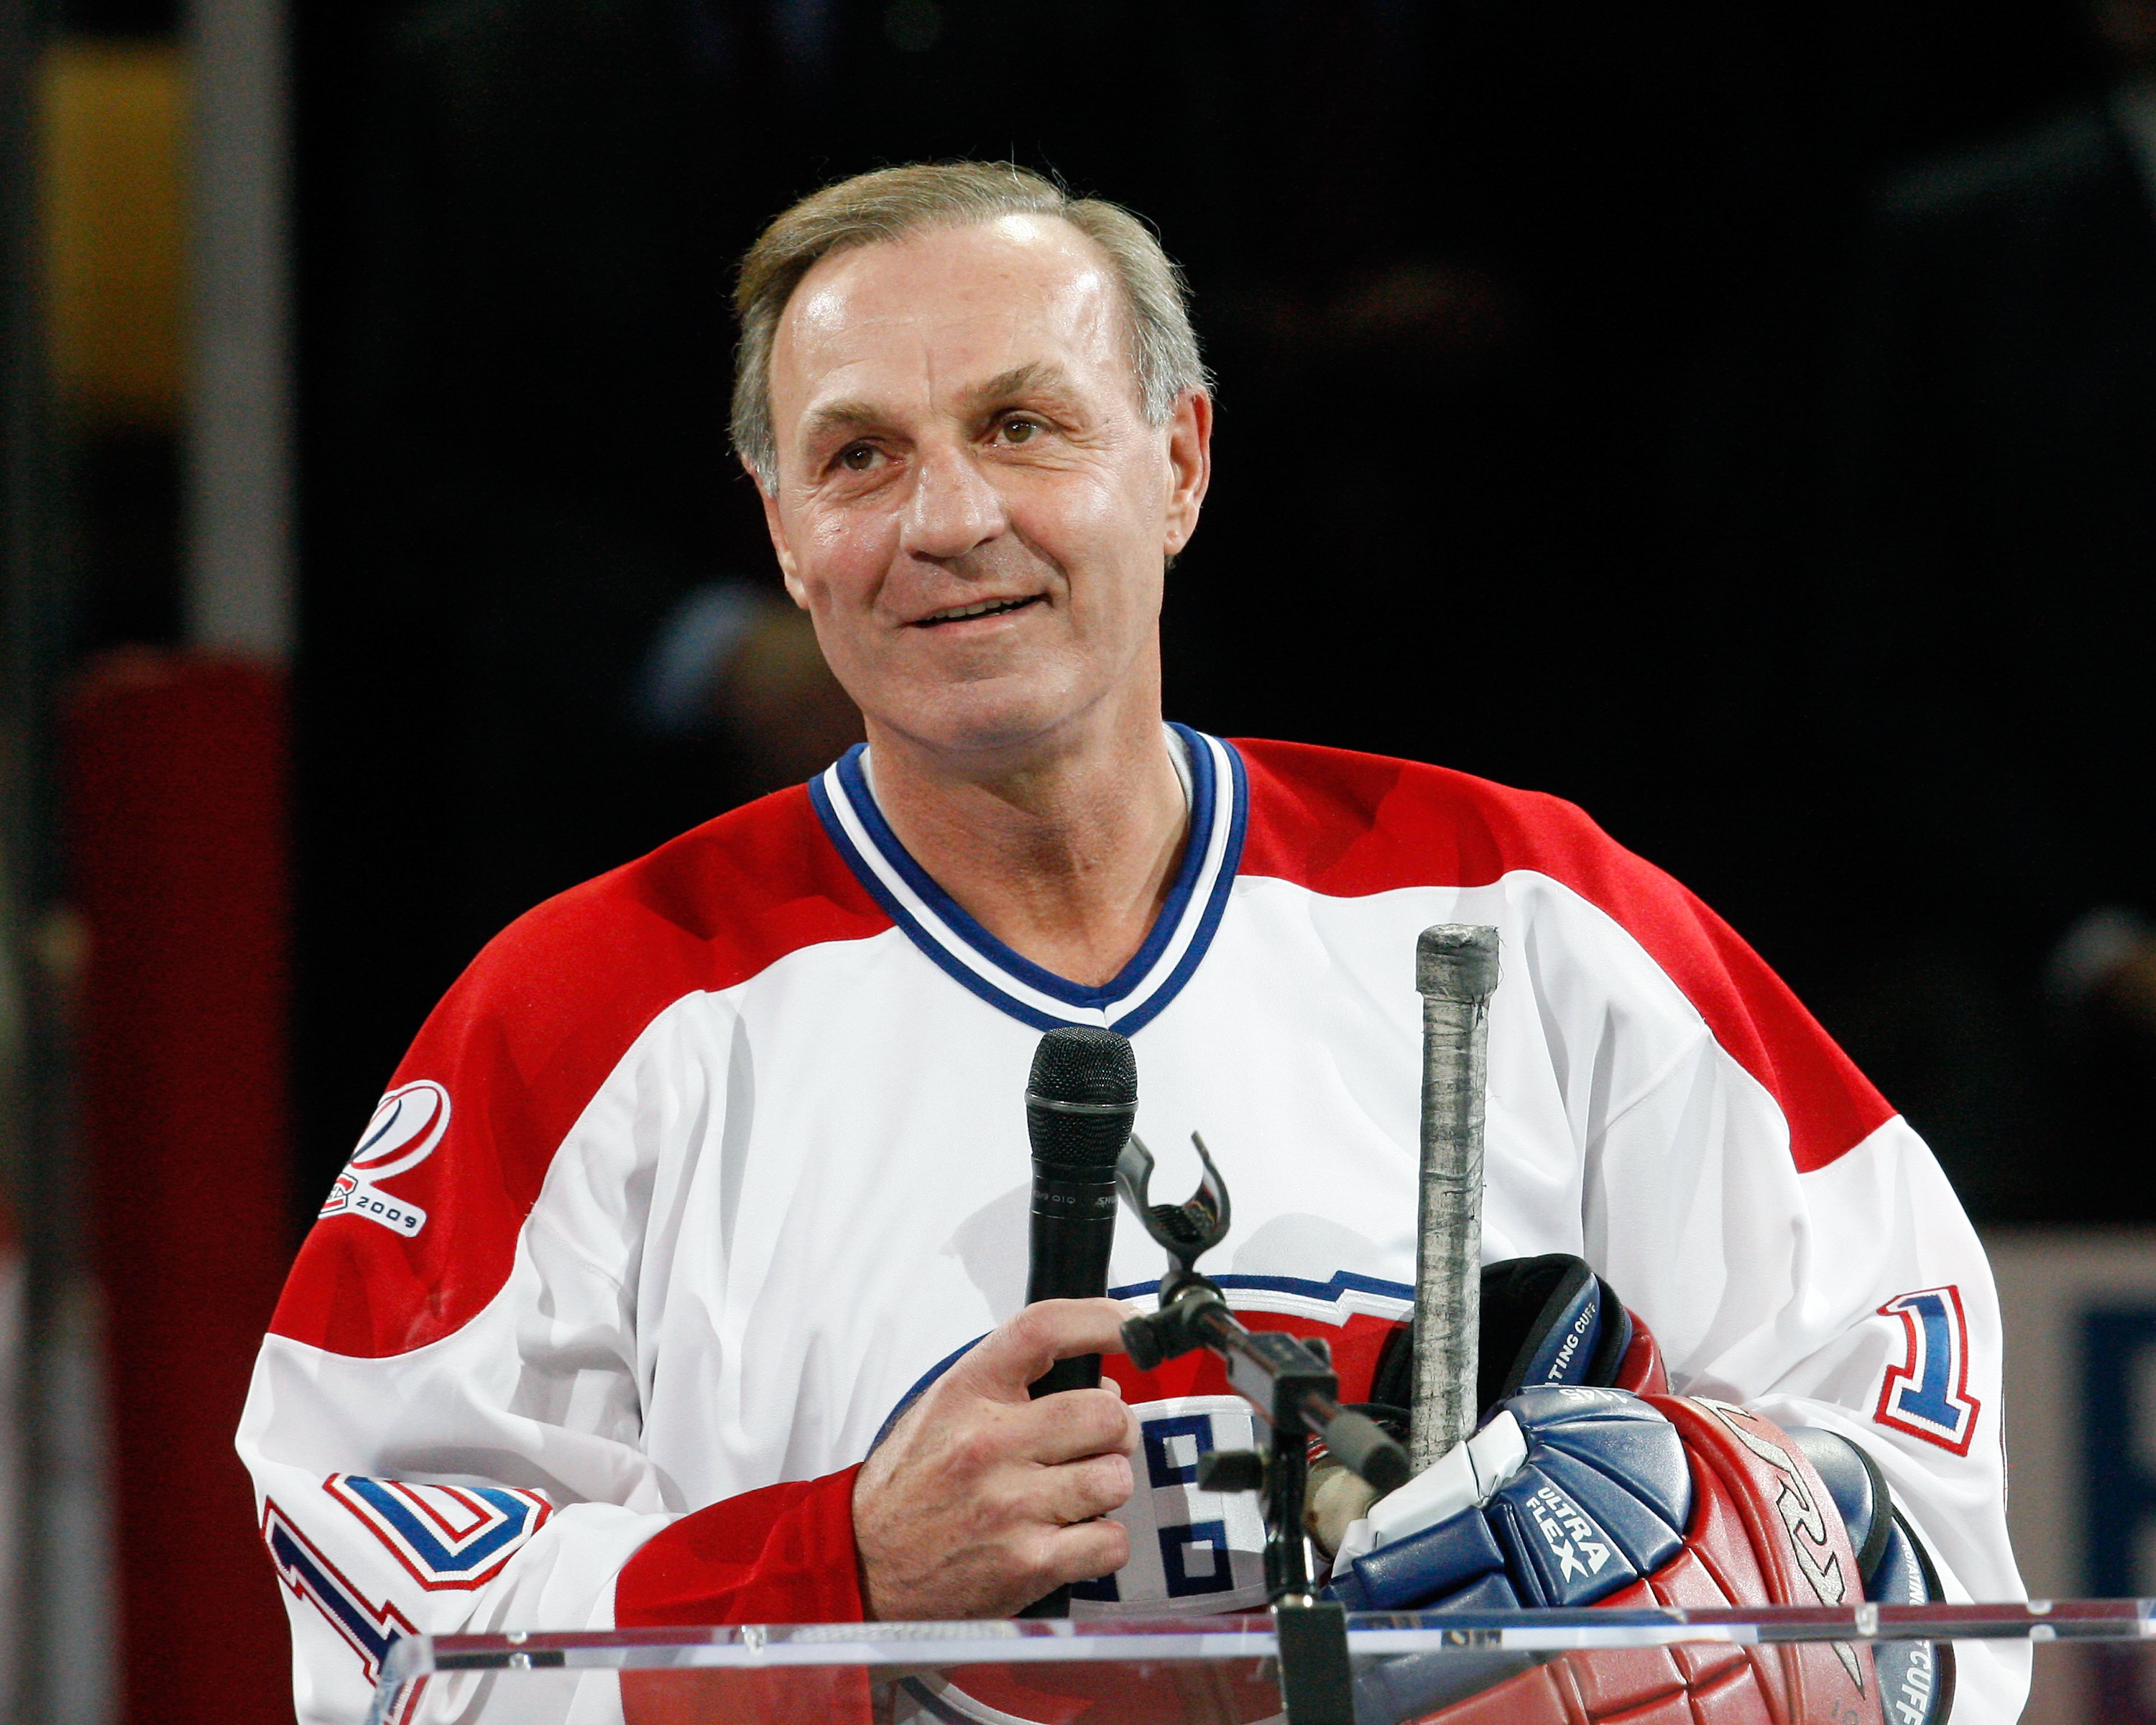 MONTREAL- DECEMBER 4:  Former Montreal Canadien Guy Lafleur speaks to fans during the Centennial Celebration ceremonies prior to the NHL game between the Montreal Canadiens and Boston Bruins on December 4, 2009 at the Bell Centre in Montreal, Quebec, Cana